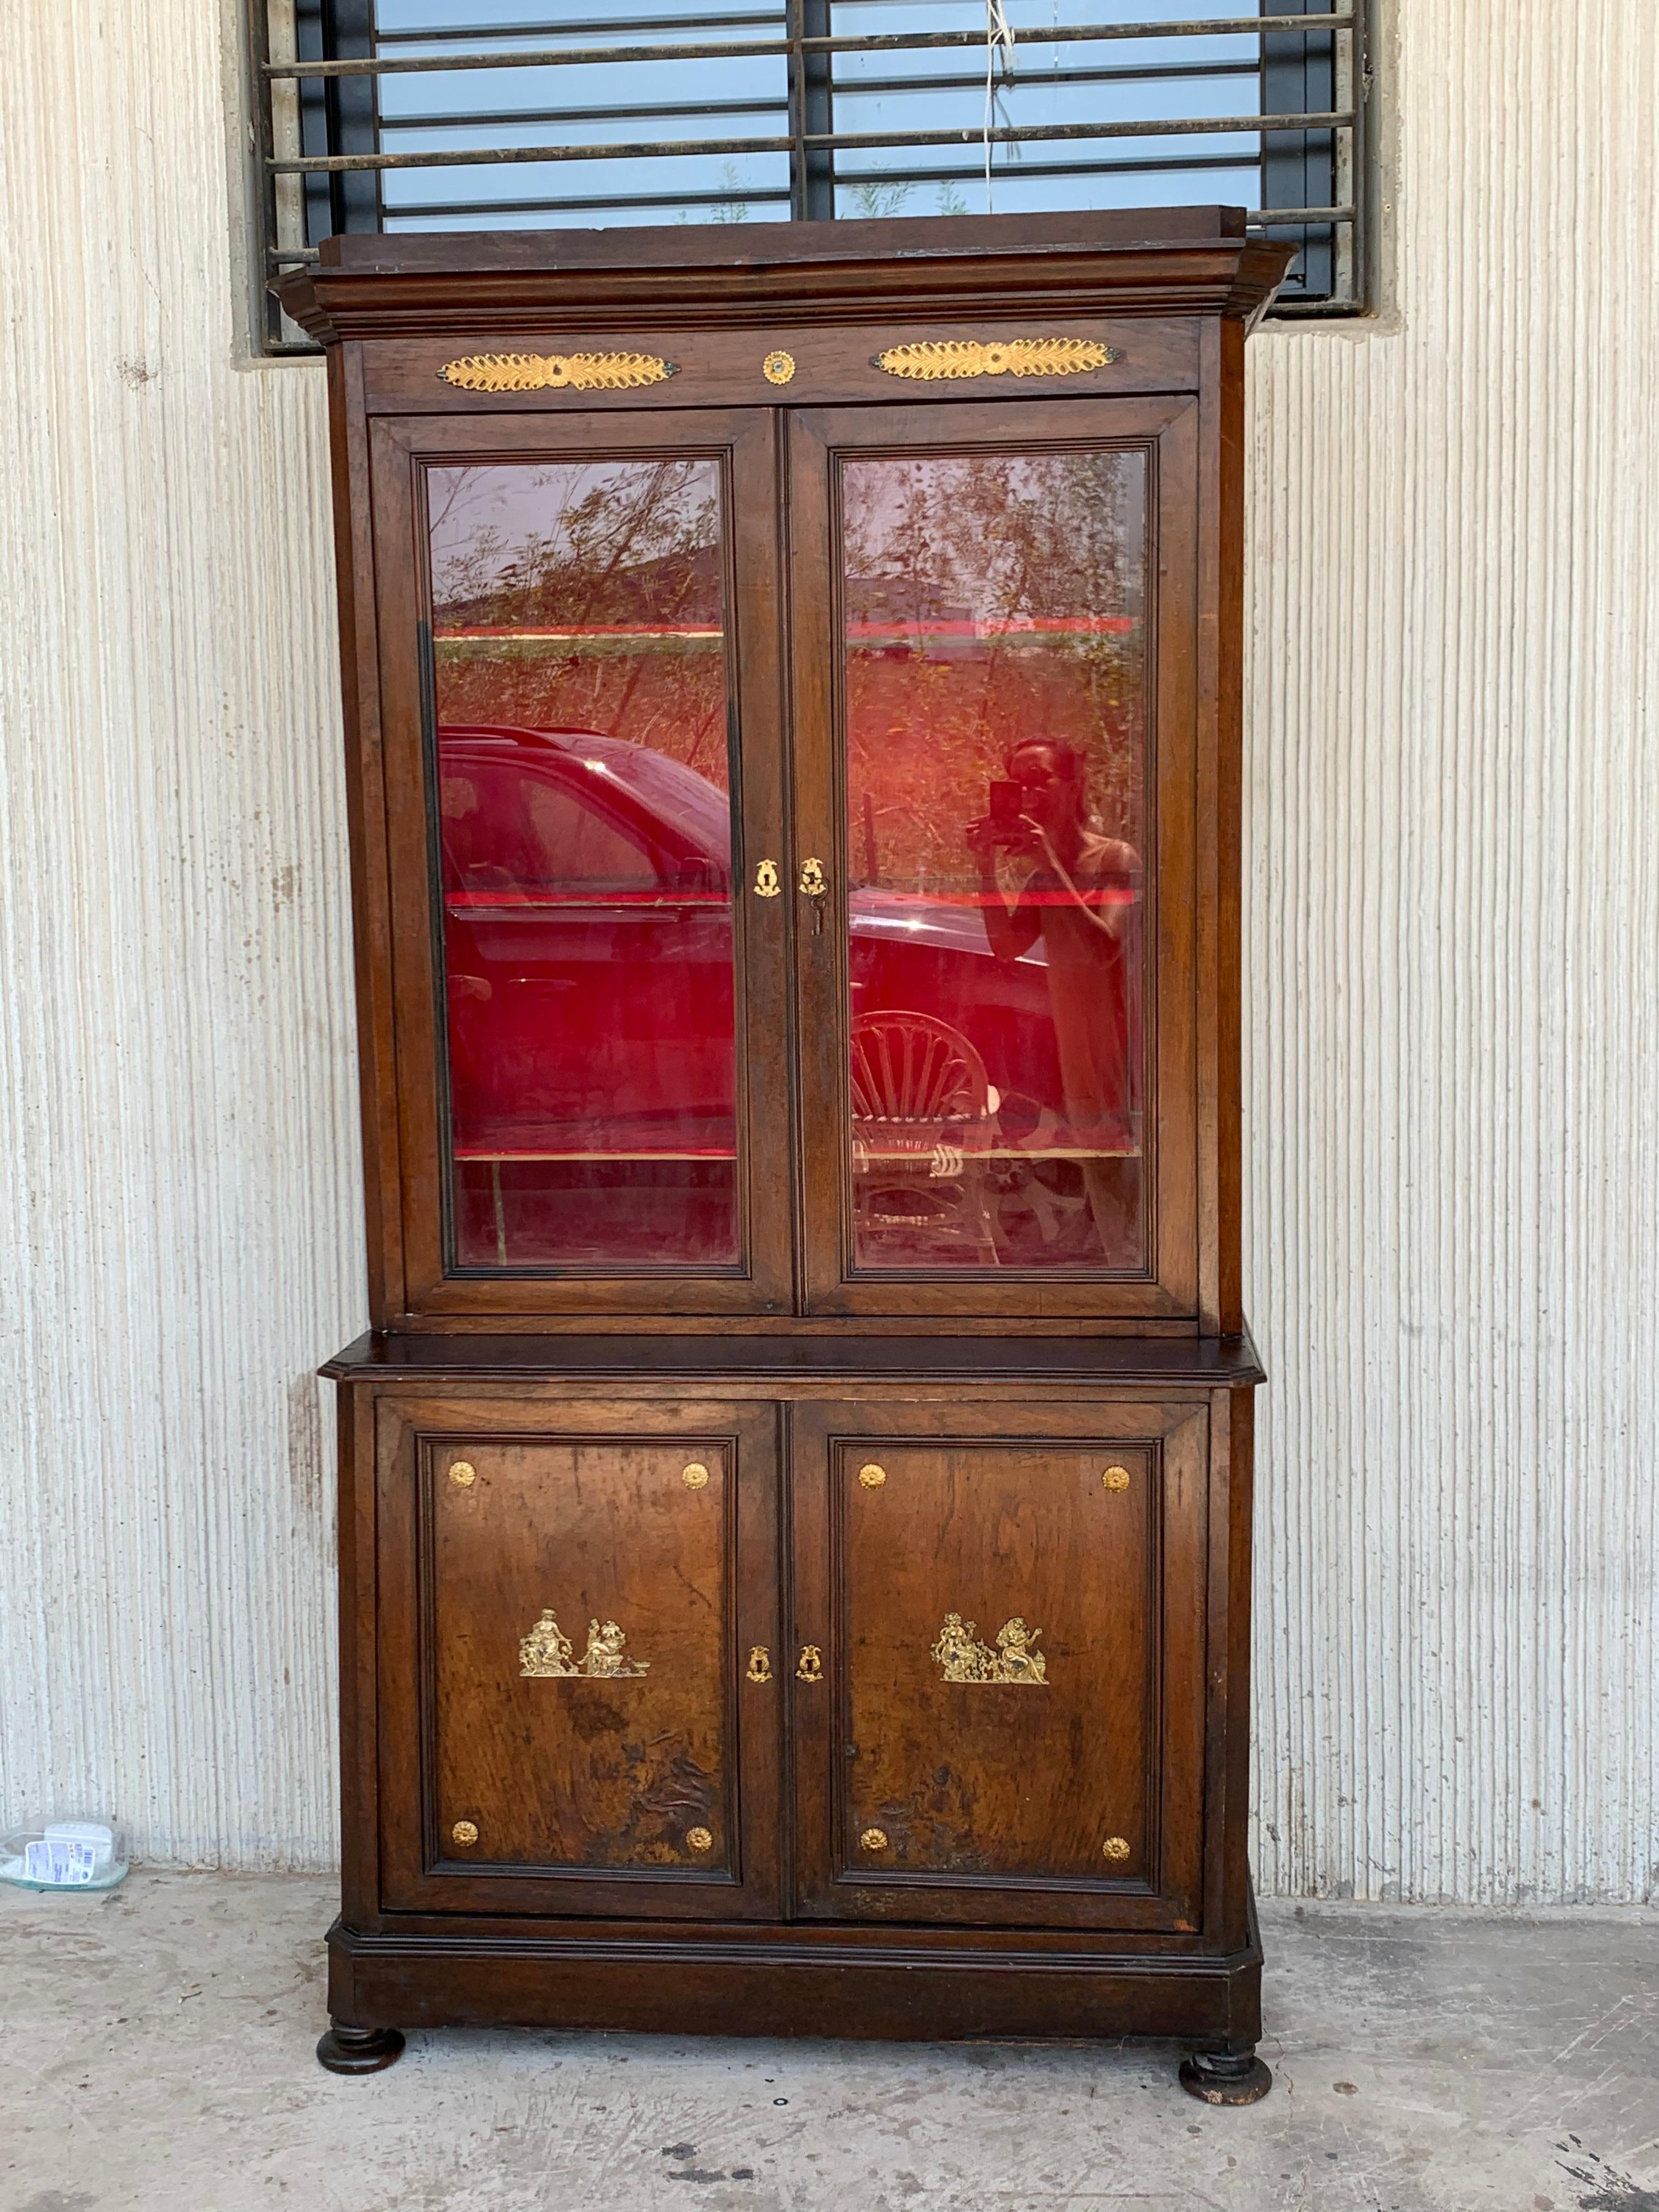 Elegant late Empire 4 doors glass and wood cabinet, bookcase in mahogany.
Pair of locking paned glass doors sitting atop pair of locking wood doors with fillings. Inside shelves.
Made in one piece.